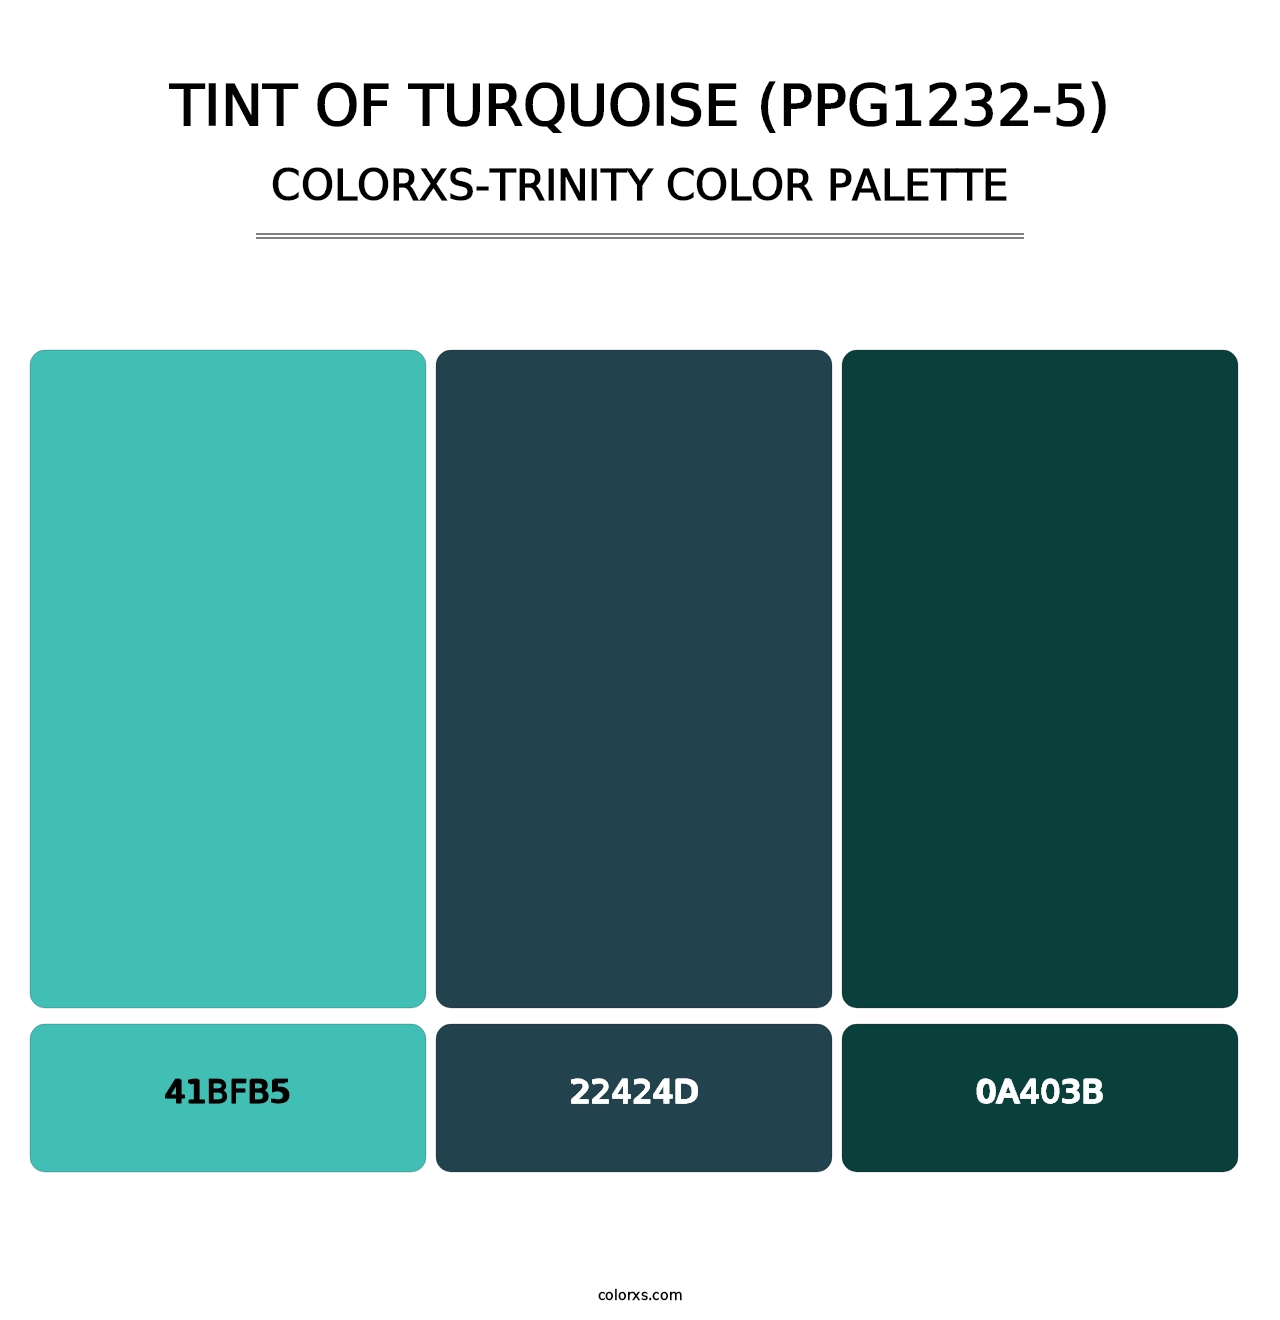 Tint Of Turquoise (PPG1232-5) - Colorxs Trinity Palette